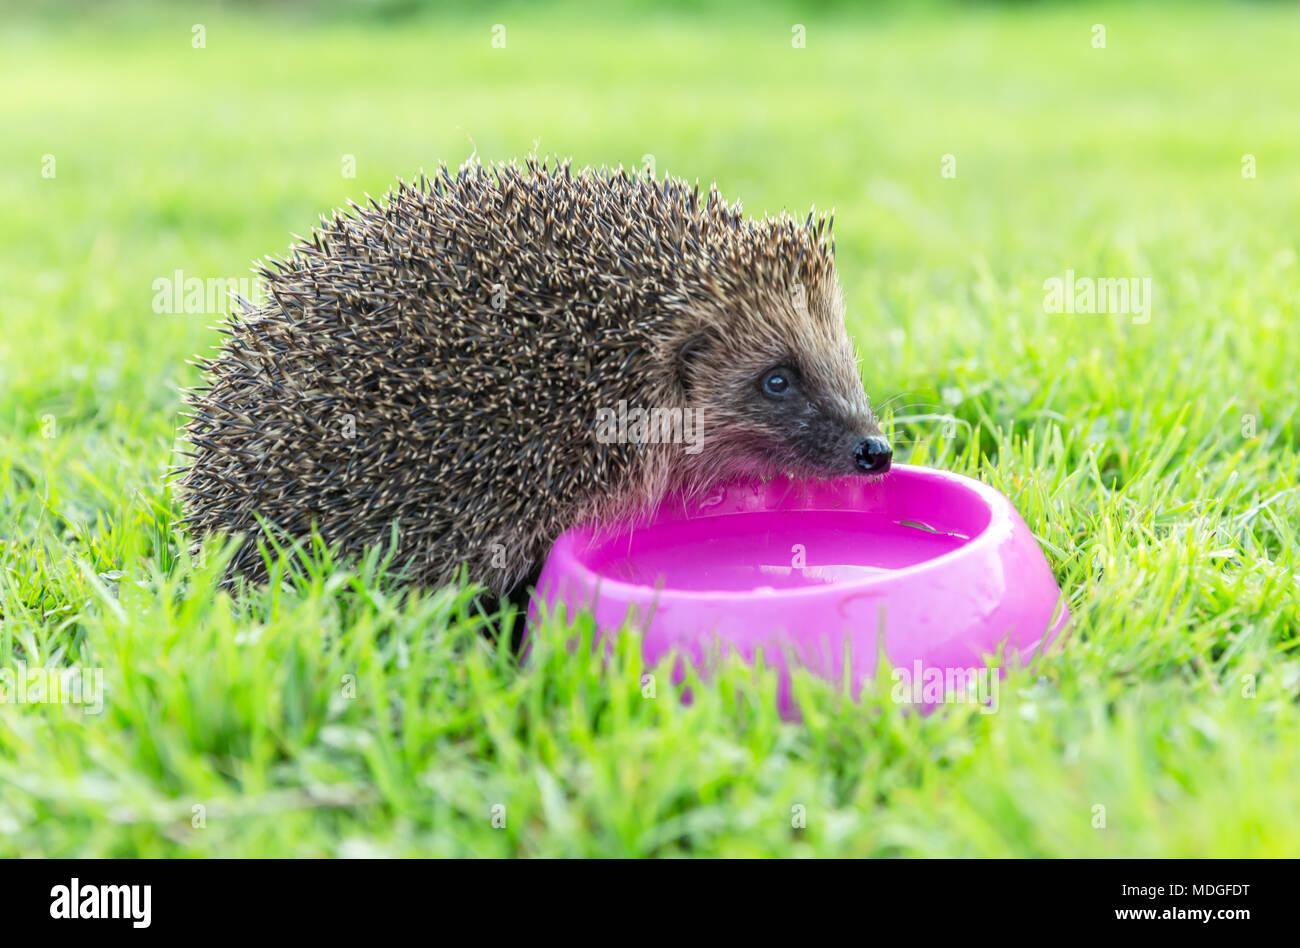 Hedgehog, wild, native European hedgehog drinking water from a pink bowl on green grass.  Horizontal, landscape Stock Photo